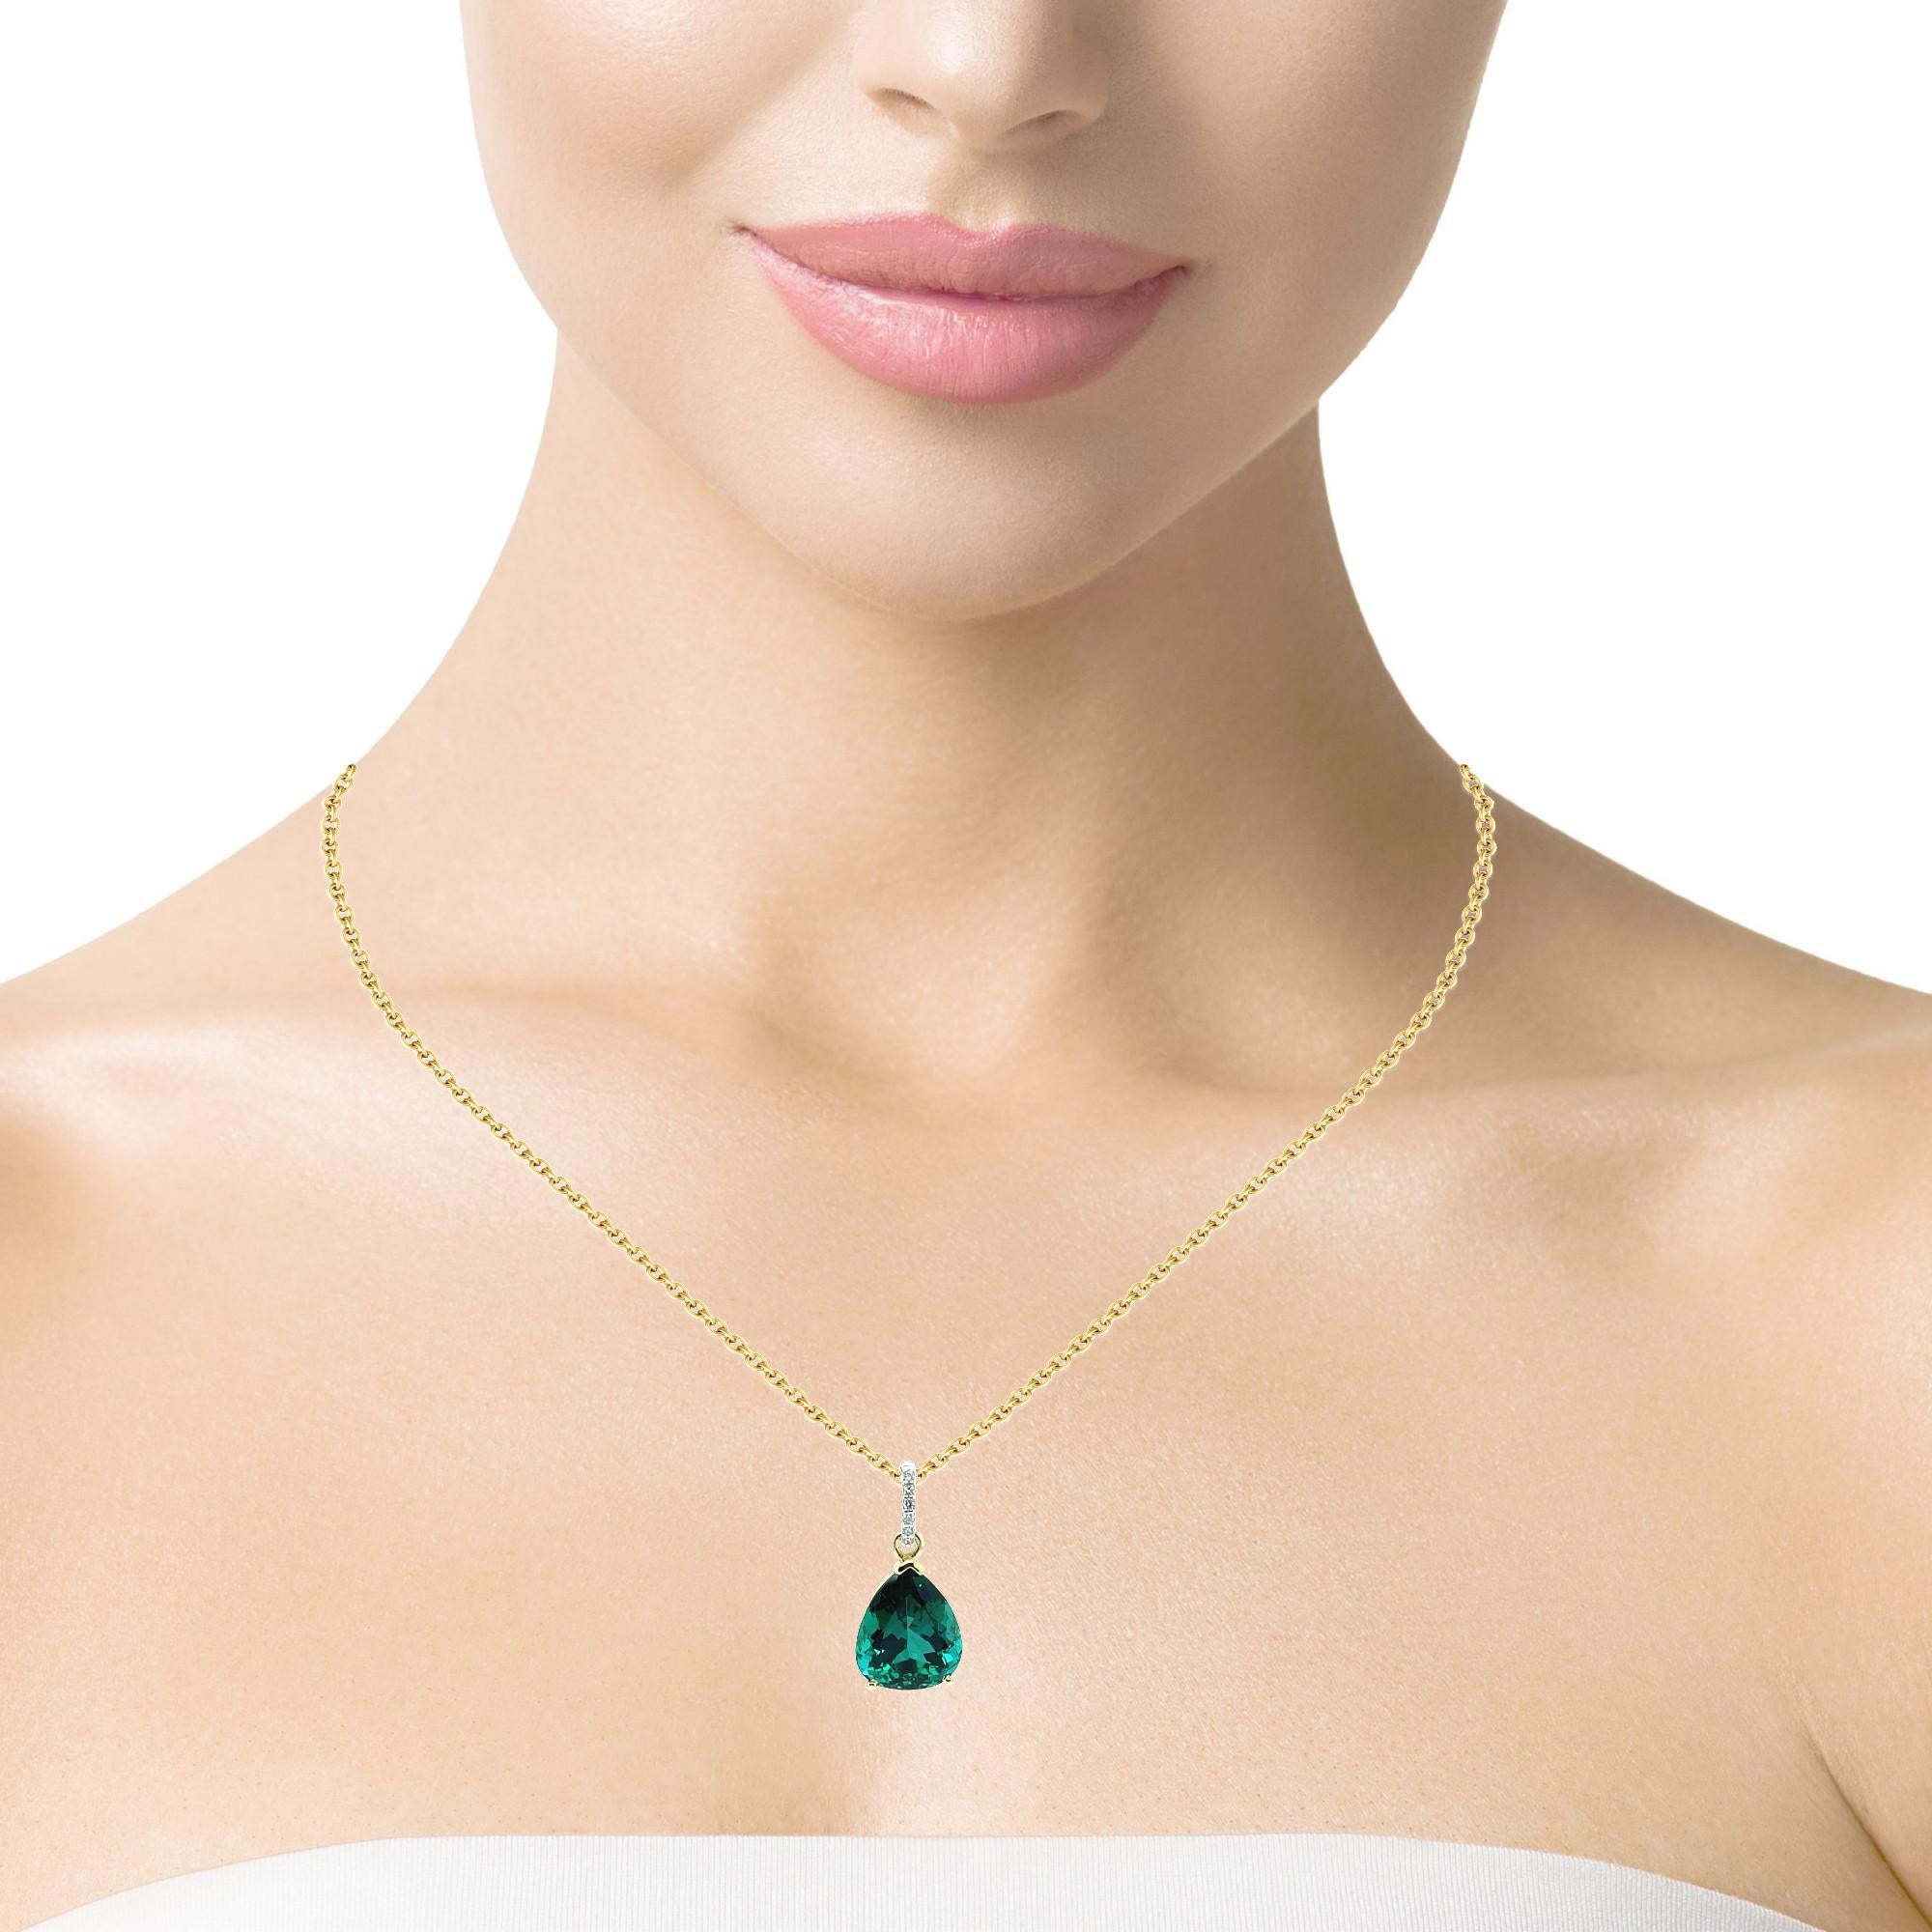 Indicolite Tourmaline and Diamond Pendant Necklace in Yellow Gold, 8.14 Carats For Sale 2